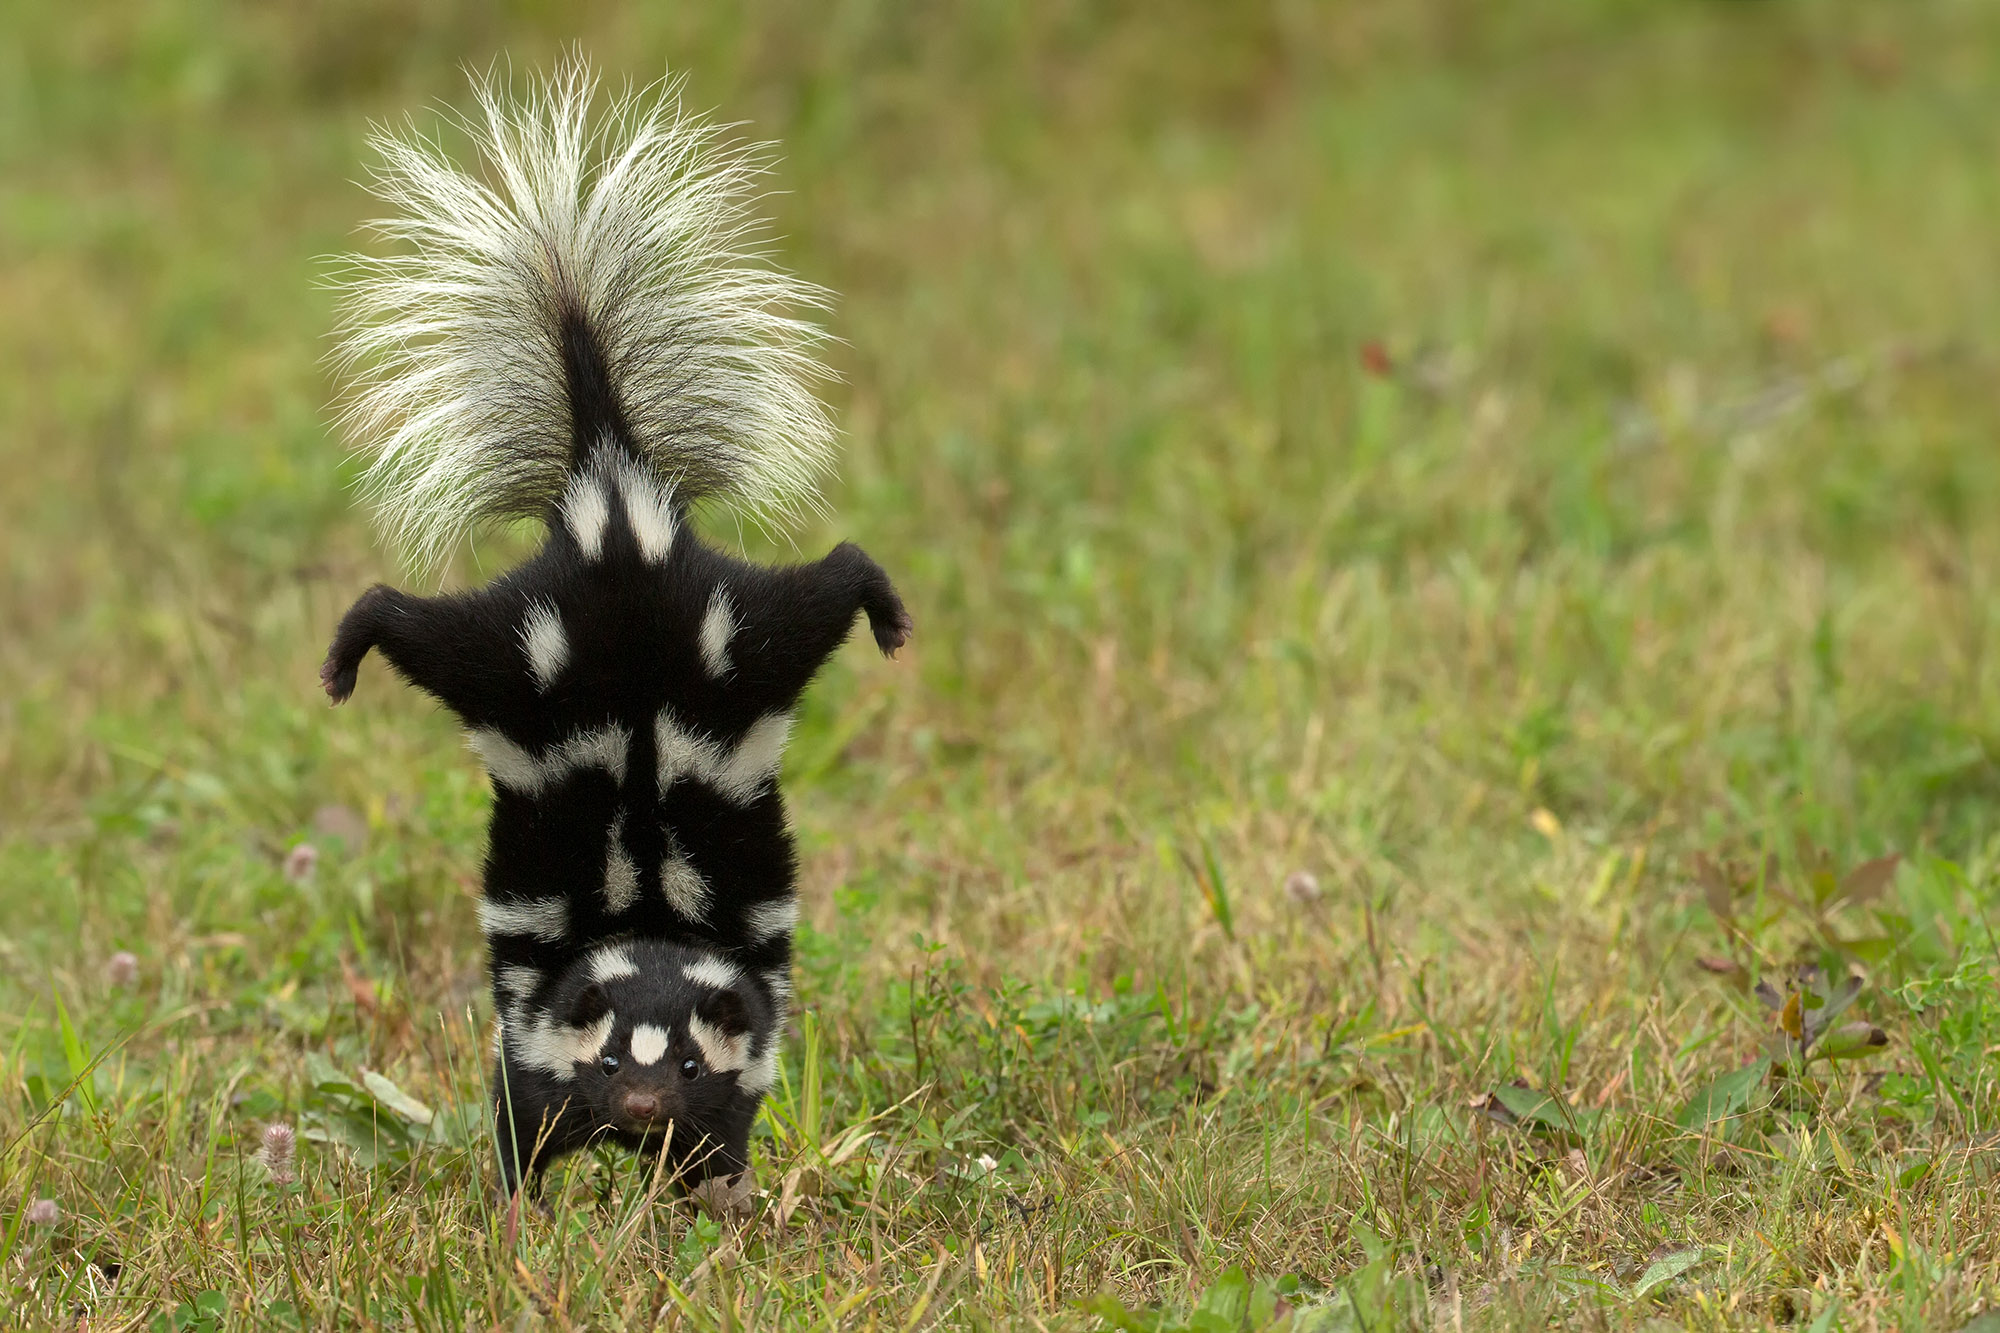 A photo of a spotted skunk in a field, standing on its front legs with its tail high in the air.